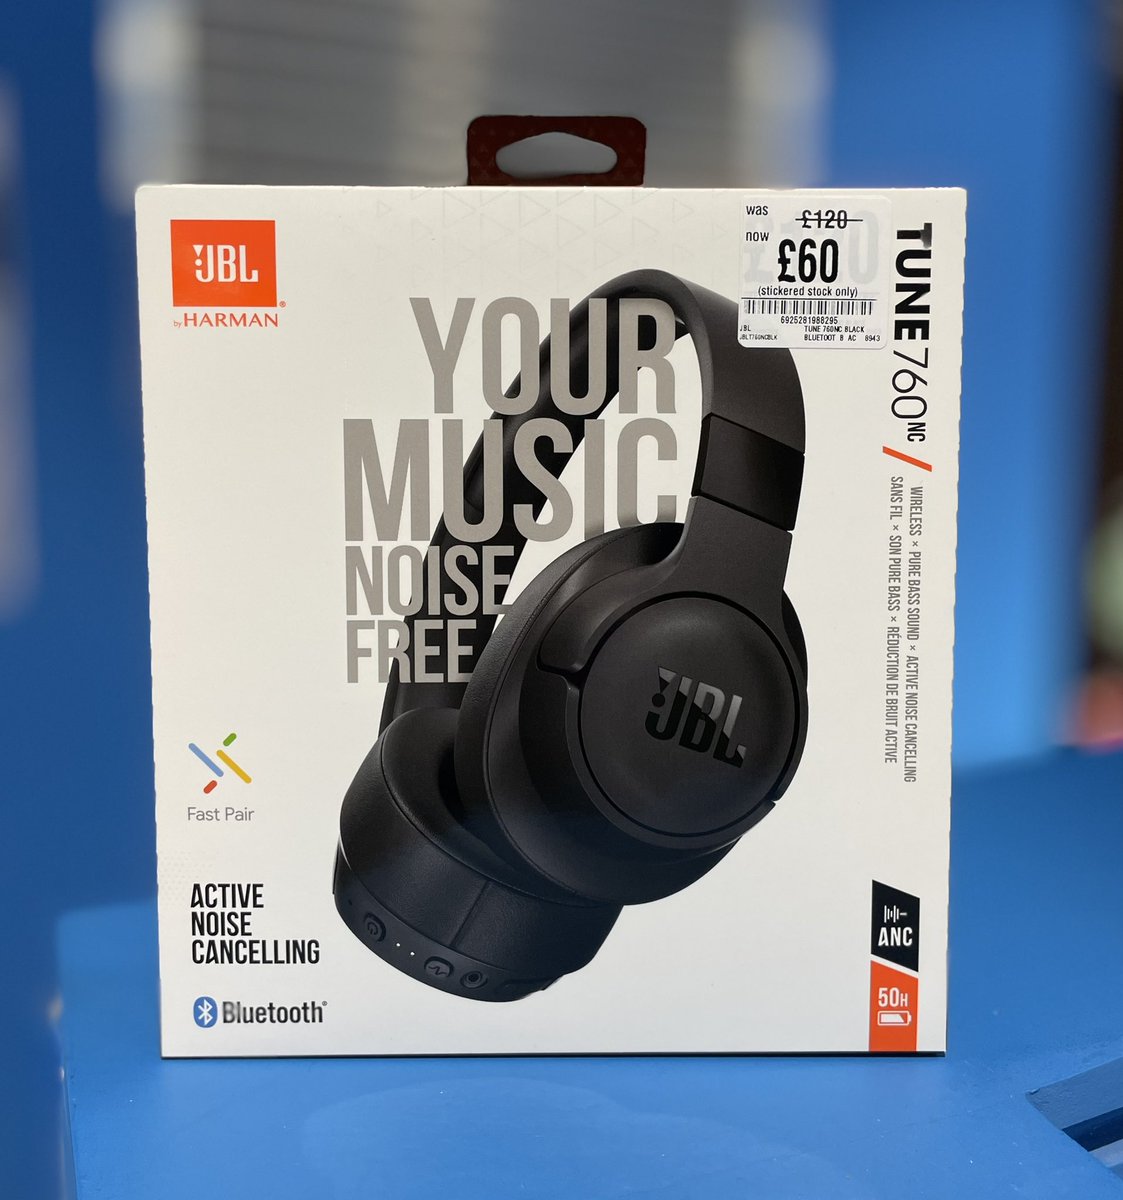 Nice deal on these noise cancelling JBL headphones!!! 🎧🎶